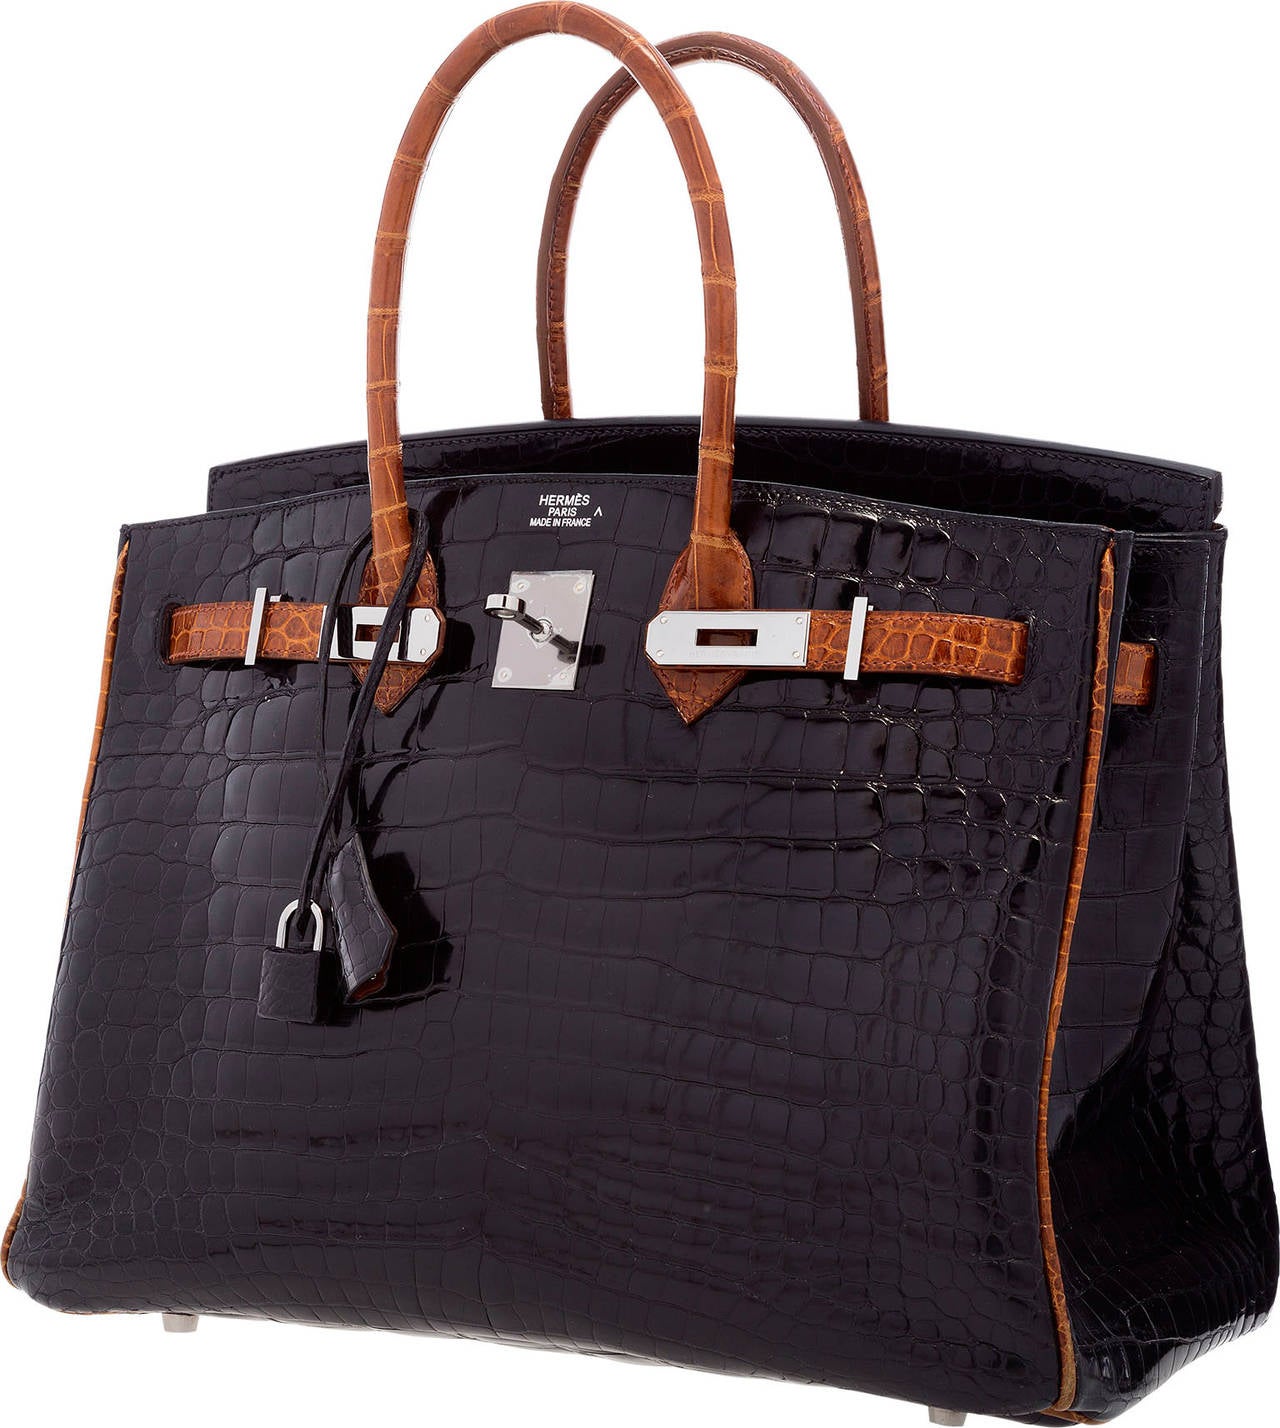 This bag is incredibly rare and beautiful. It is a limited edition Birkin that exemplifies the craftsmanship and incomparable quality of Hermes products. It is done in Shiny Porosus Crocodile, one of the most valuable and luxurious materials